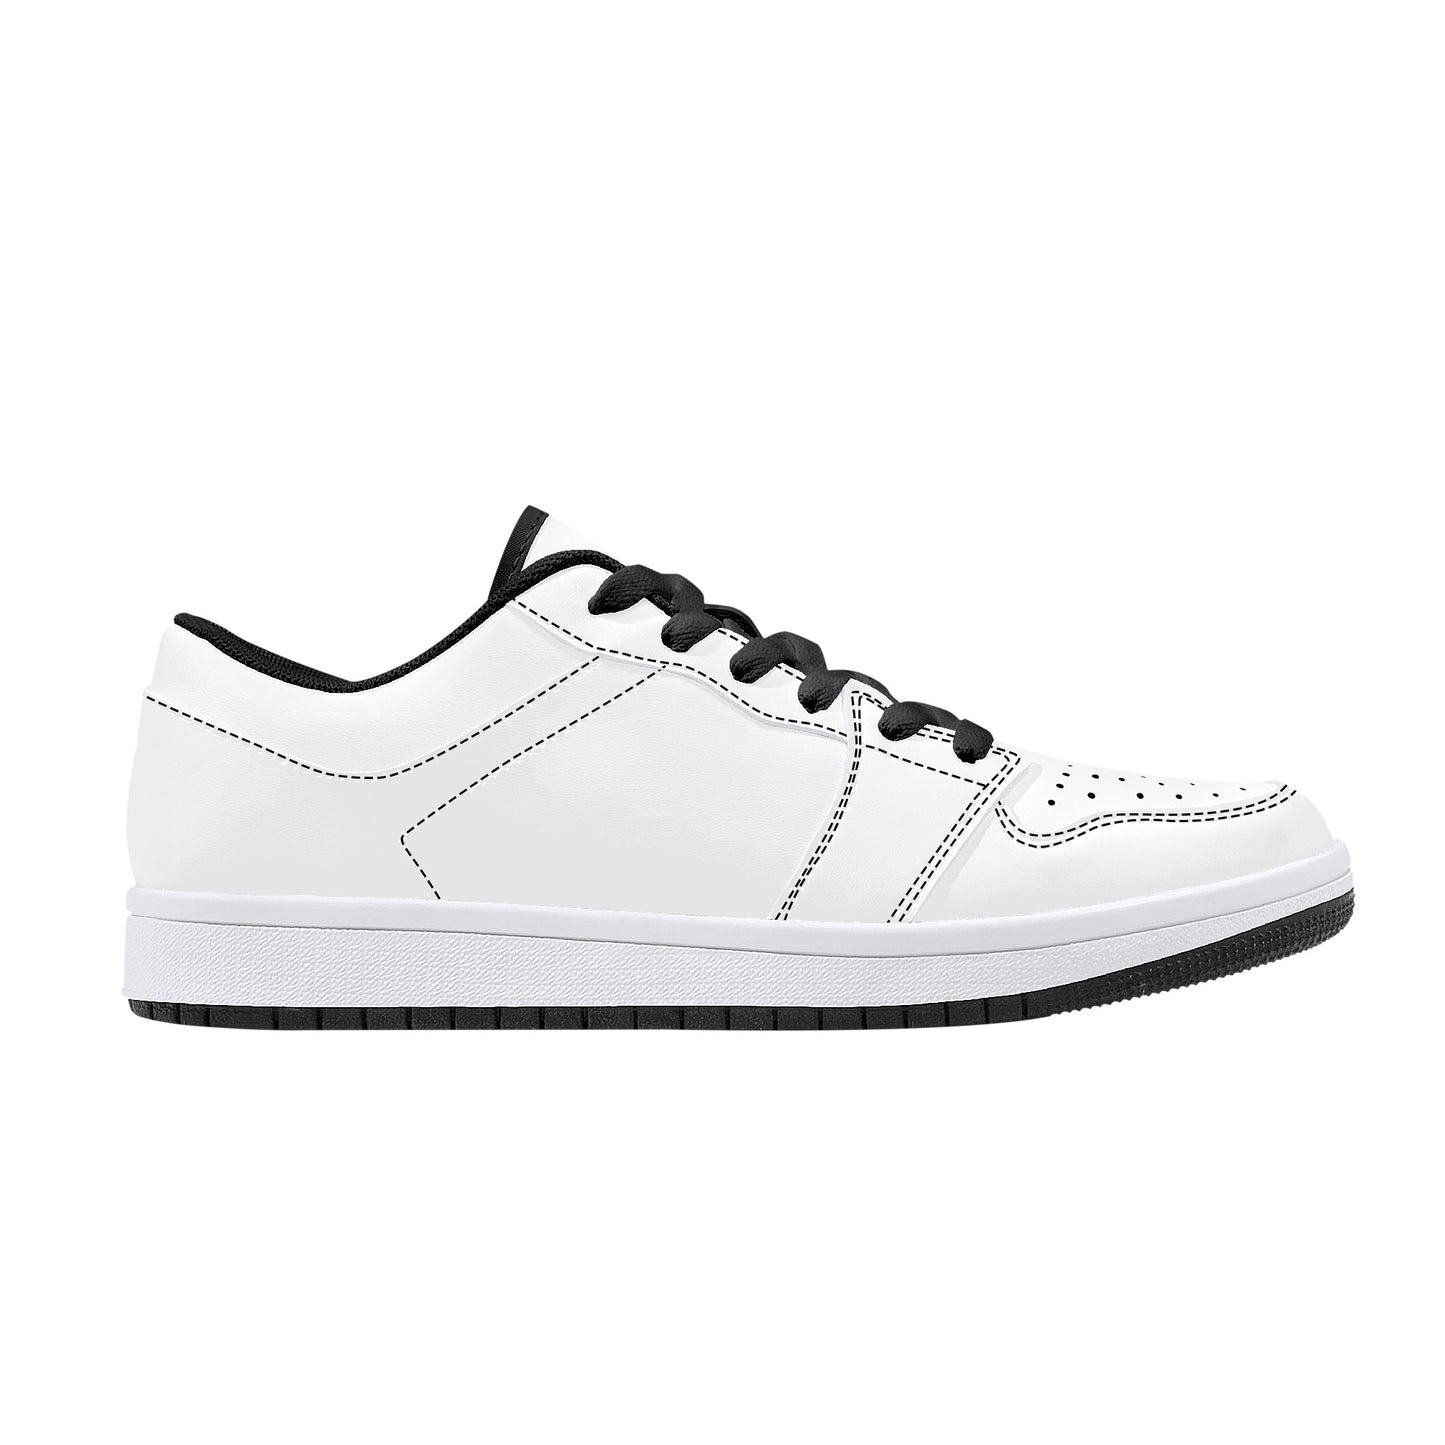 Create Your Own - Low Top Synthetic Leather Sneakers - Black